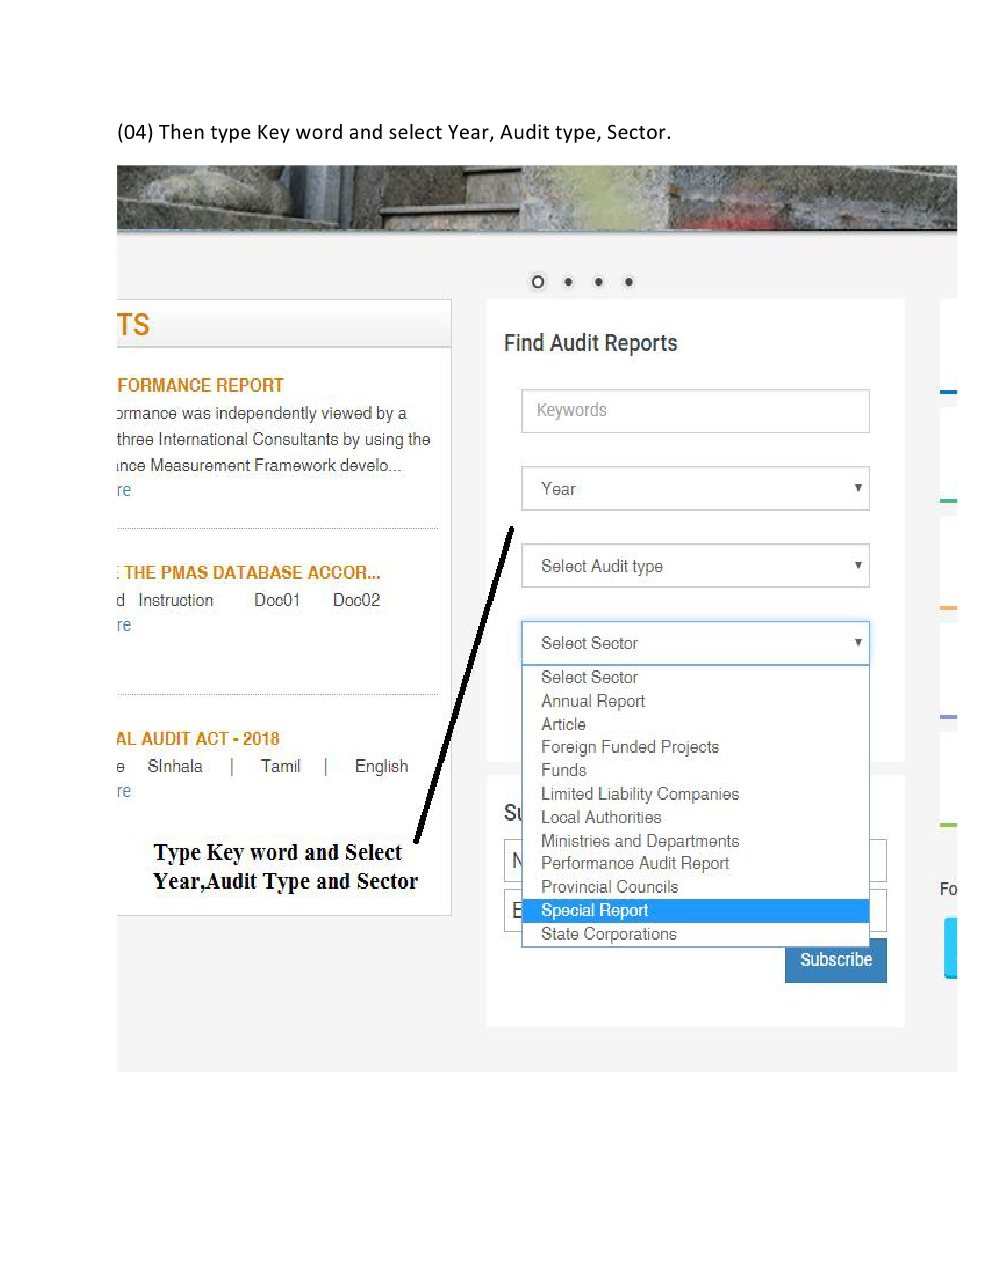 How to find Audit Report 2